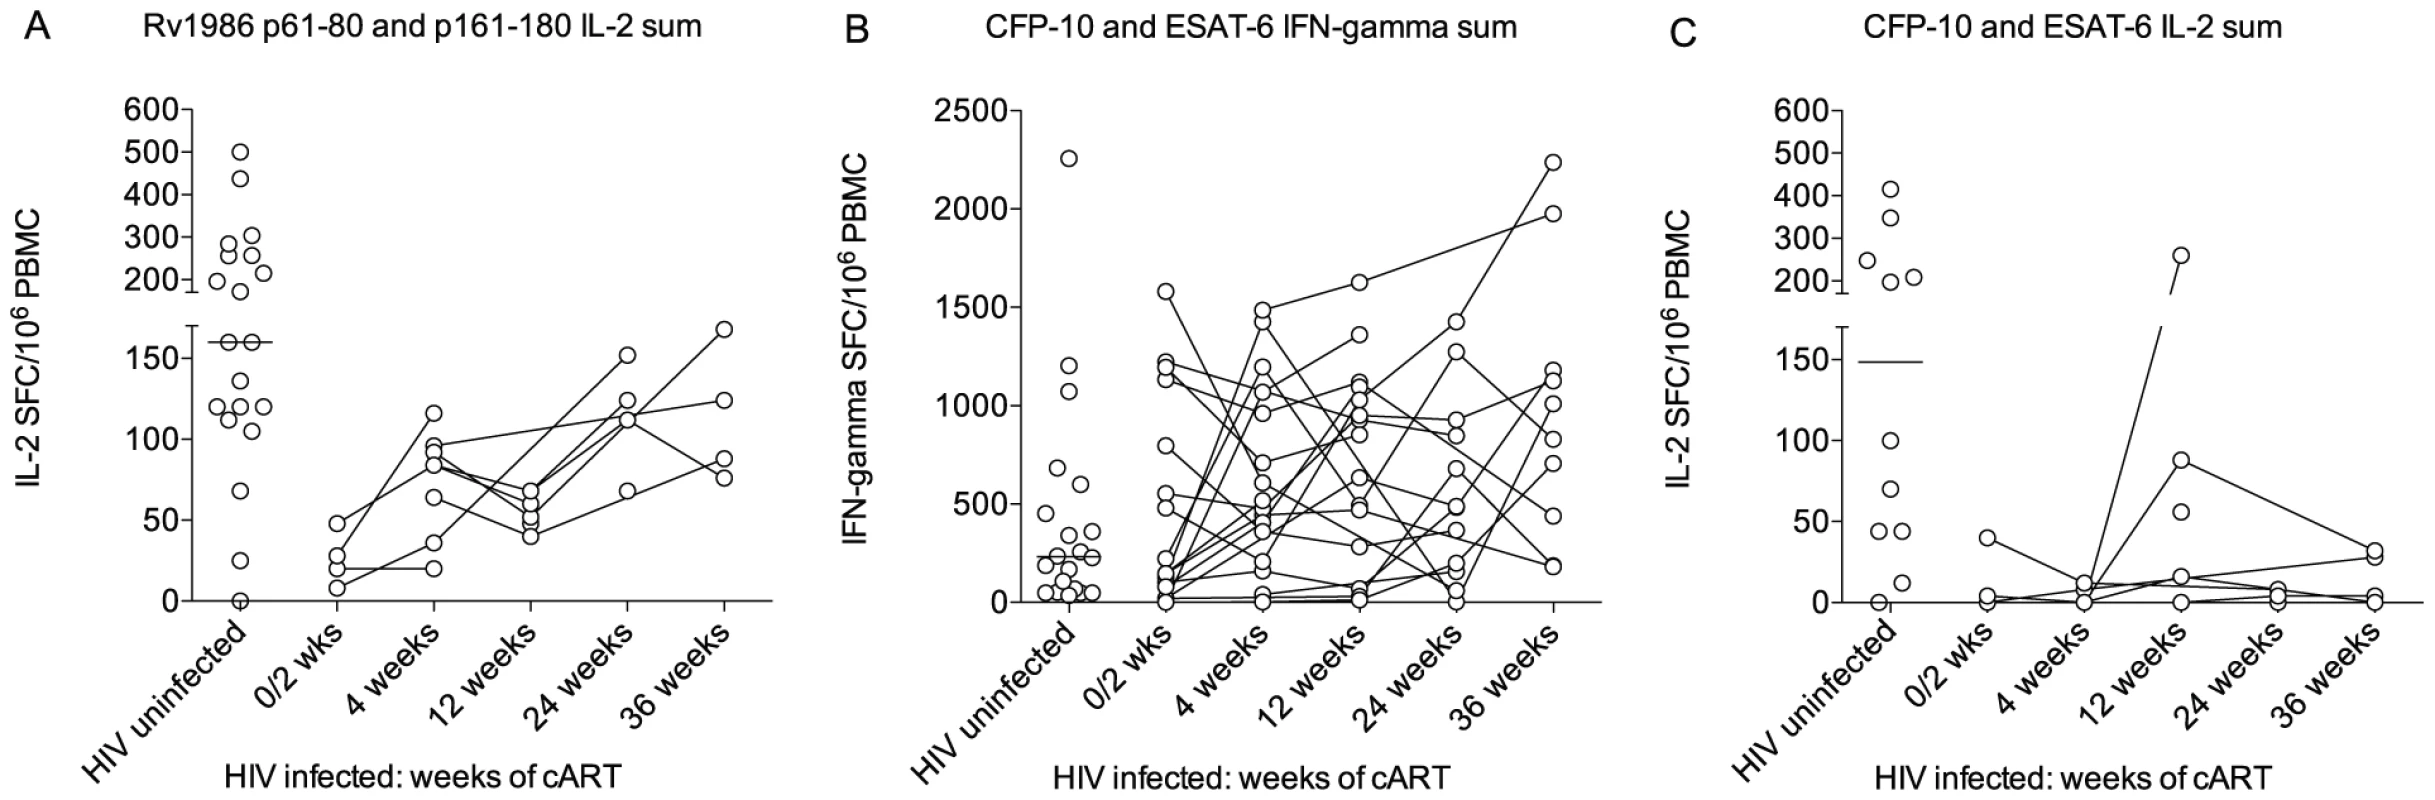 Response of HIV infected persons to Rv1986, ESAT-6 and CFP-10.